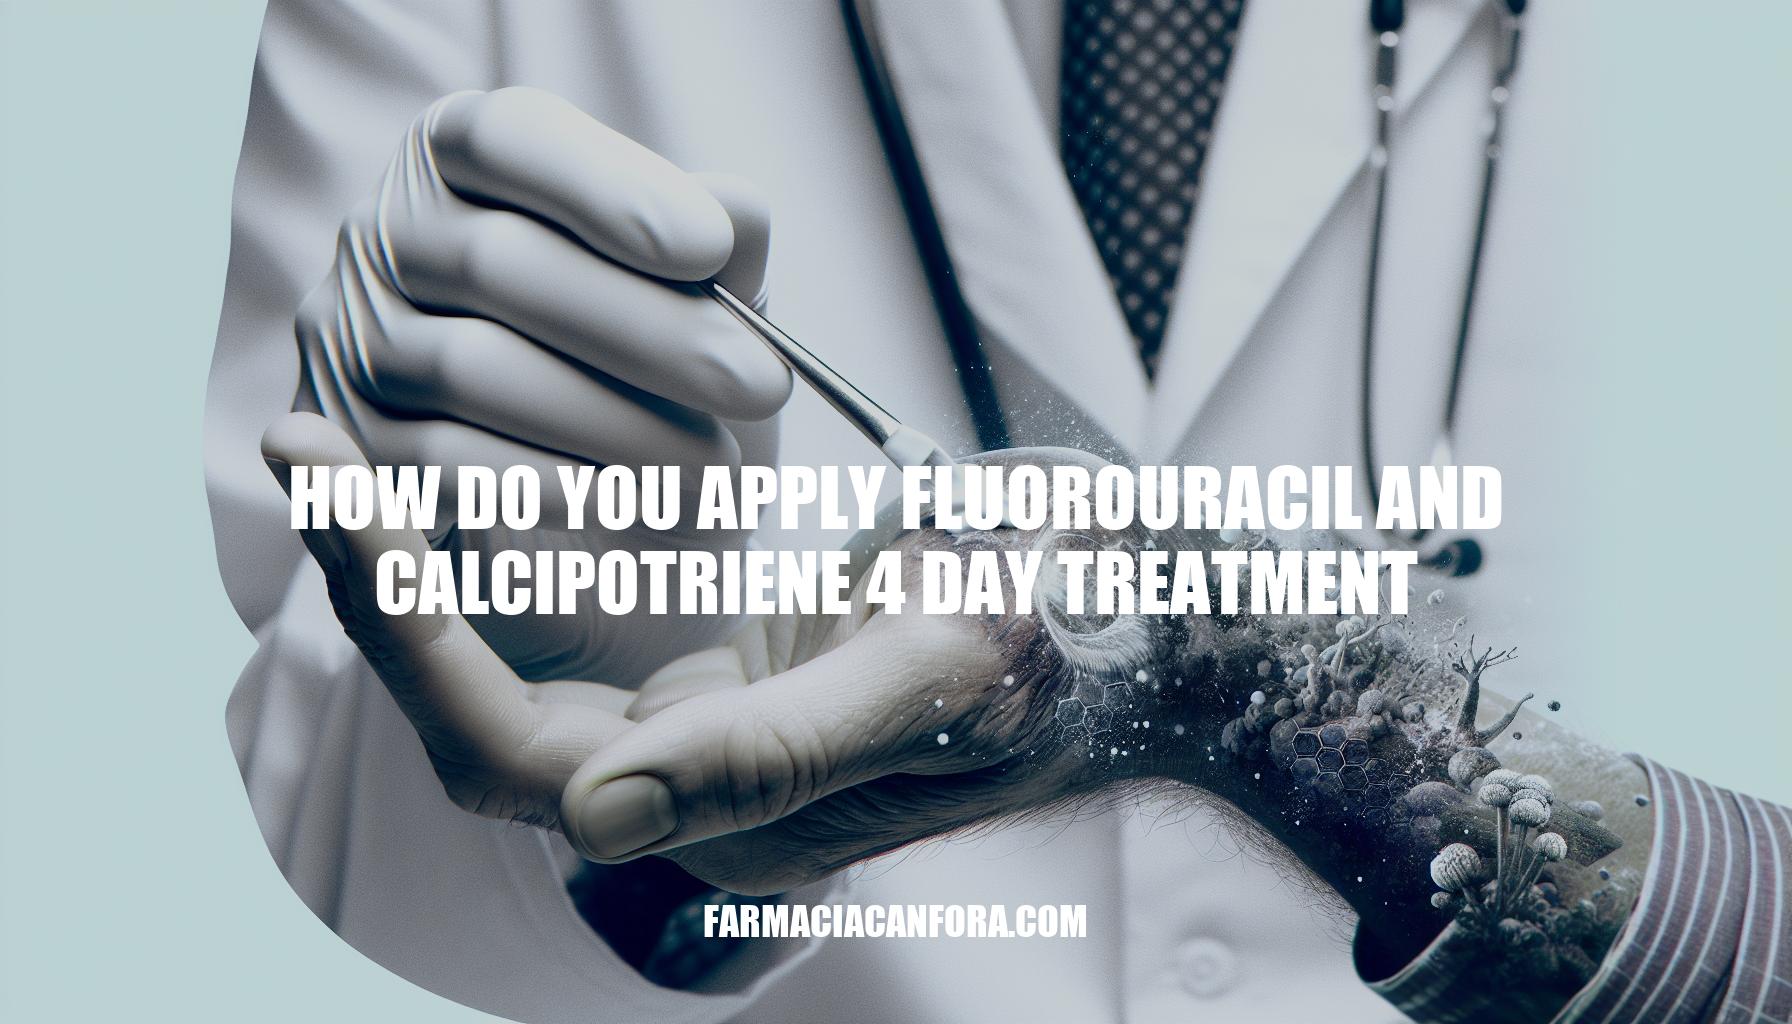 How to Apply Fluorouracil and Calcipotriene 4-Day Treatment